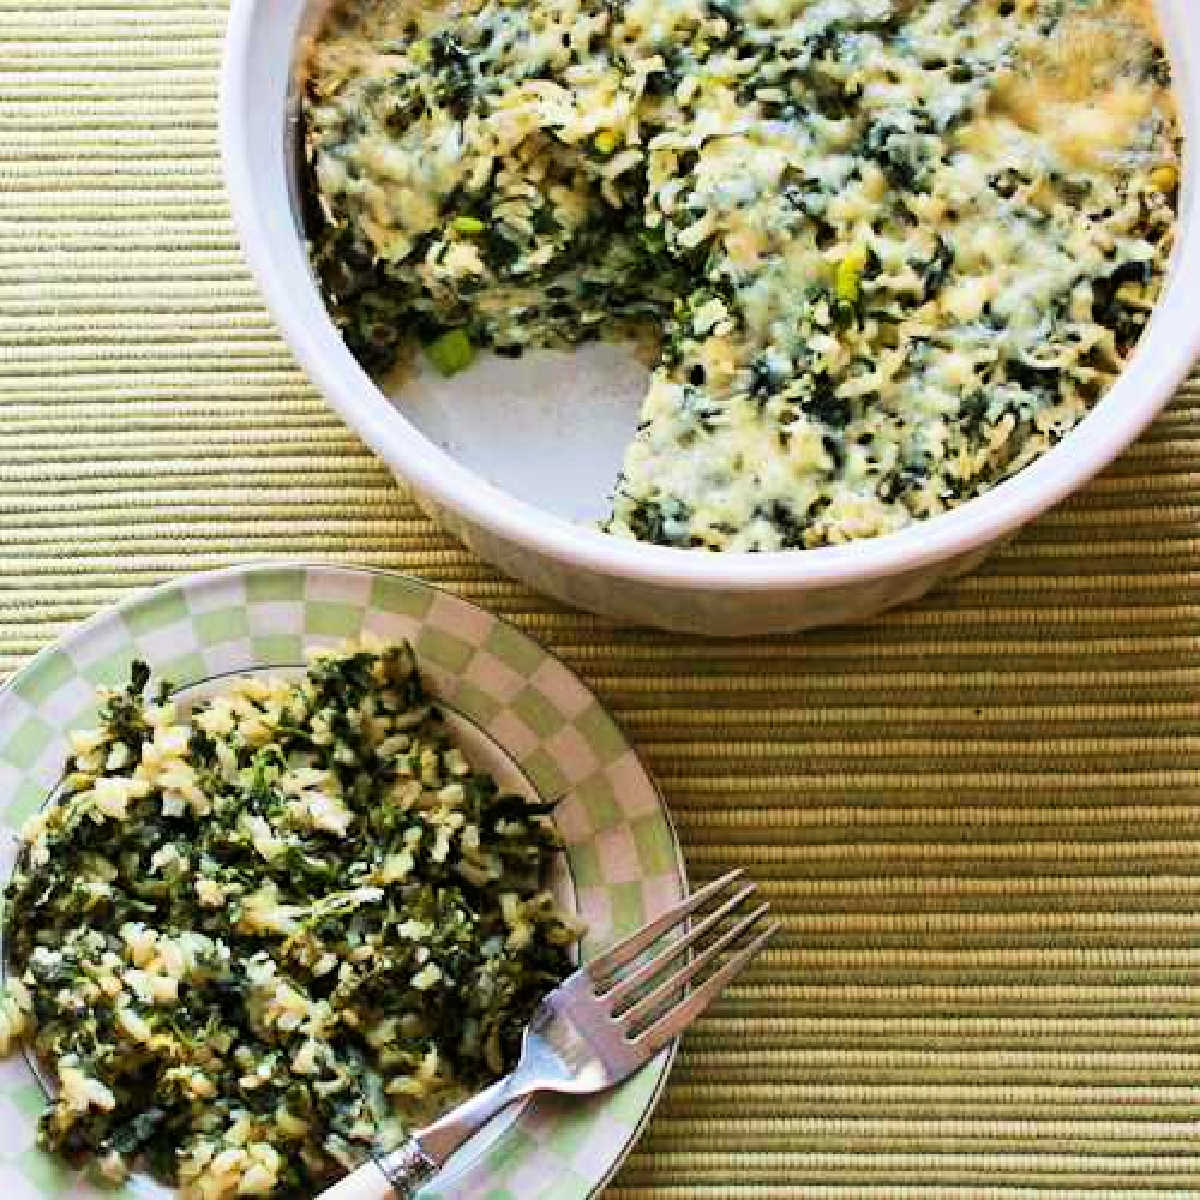 Square image for Spinach Feta Casserole with Brown Rice, one serving shown on plate with whole casserole in back.